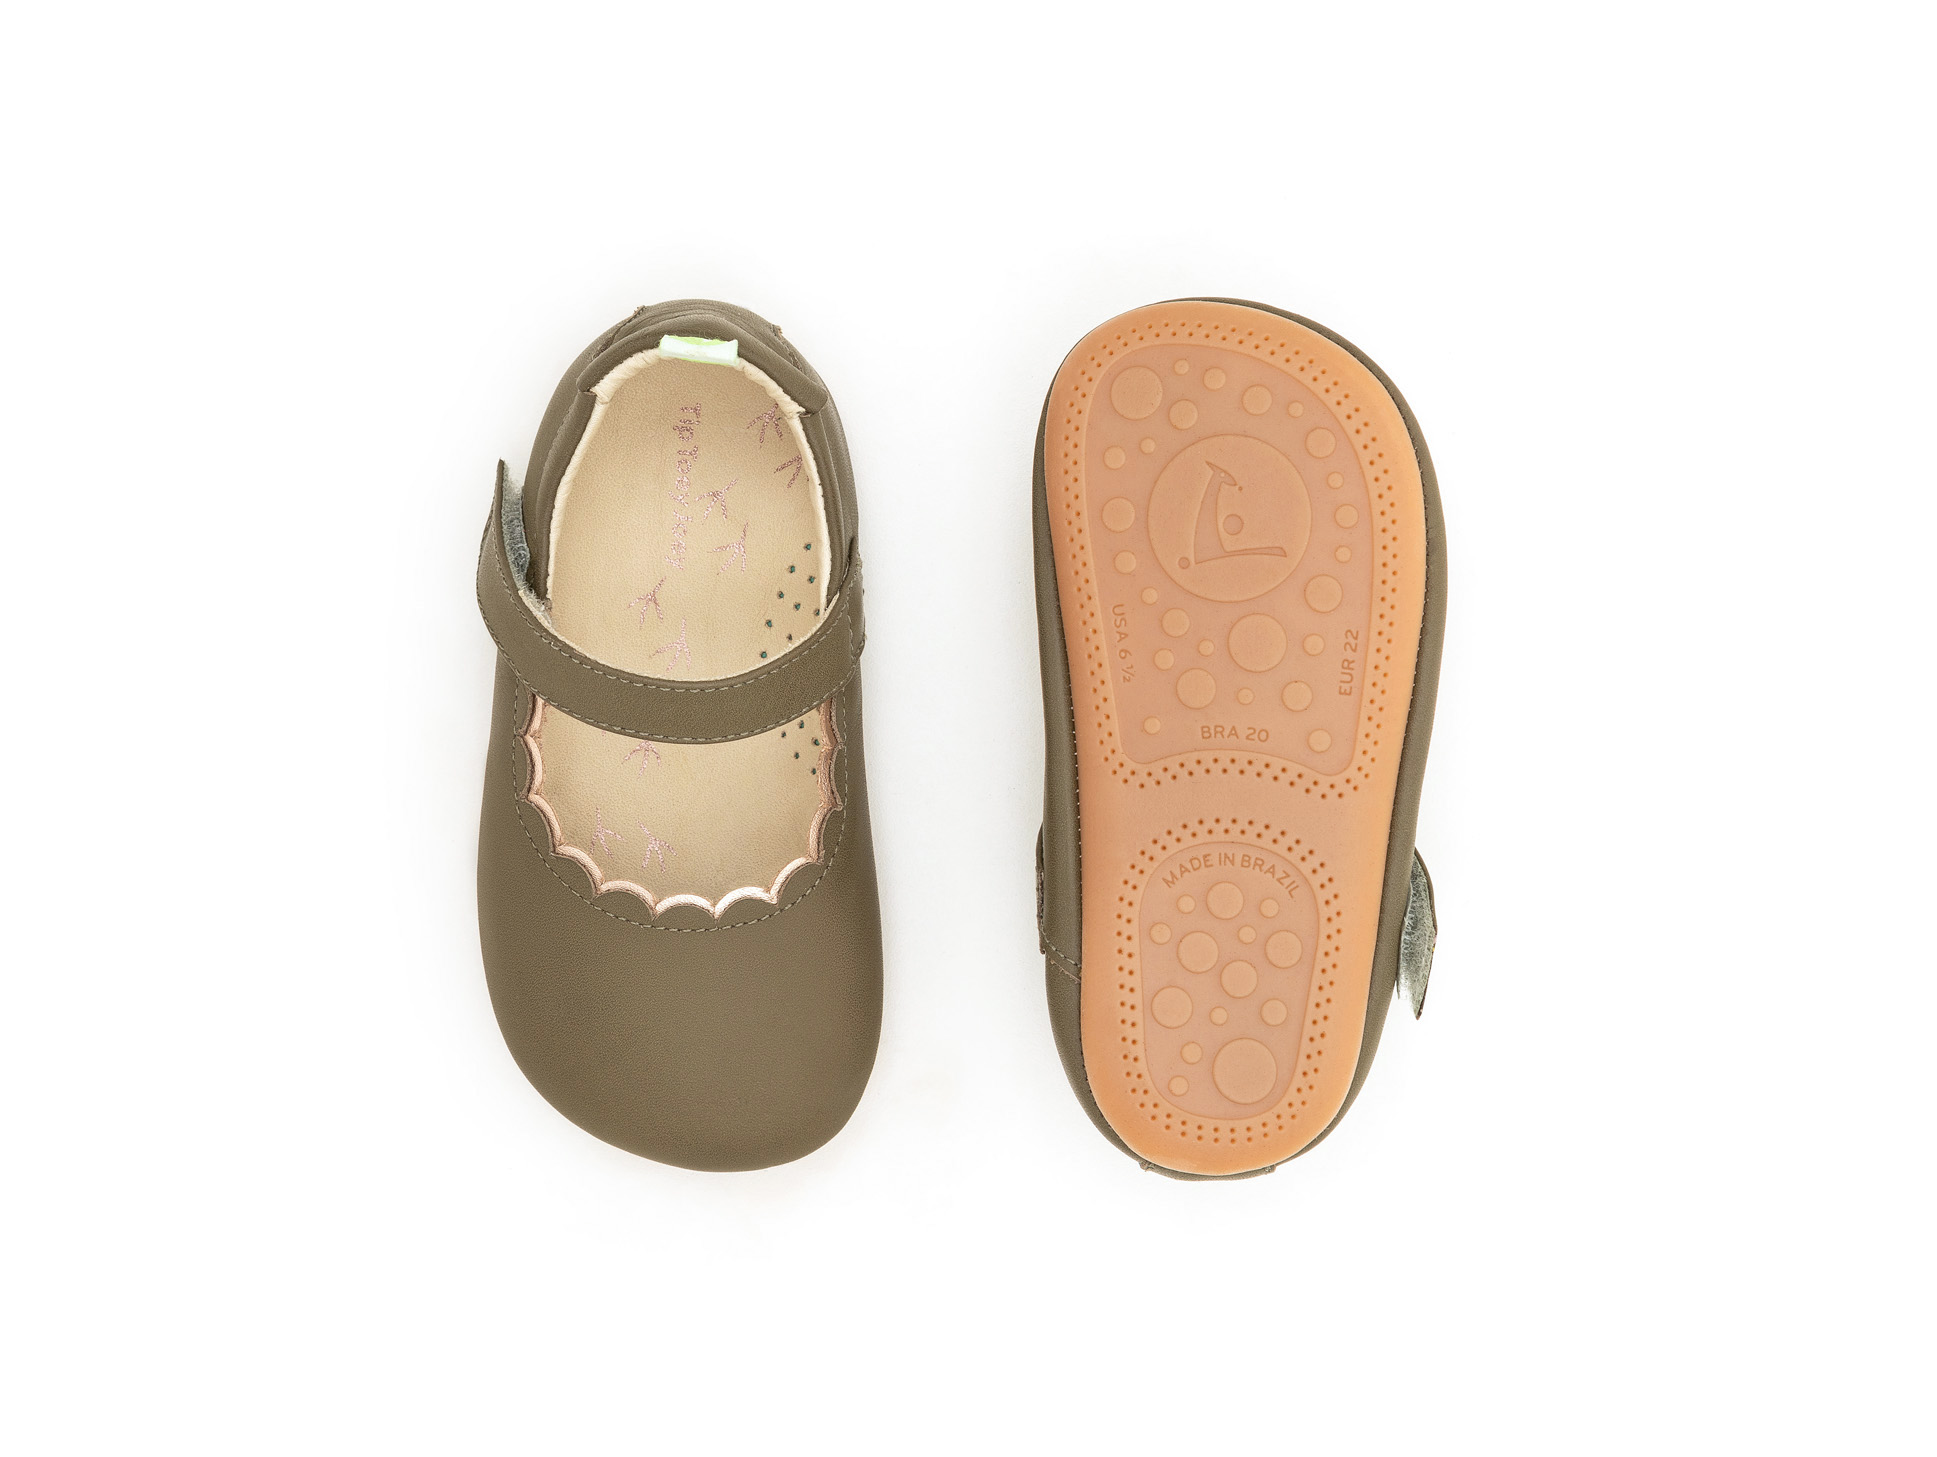 UP & GO Mary Janes for Girls Roundy | Tip Toey Joey - Australia - 2